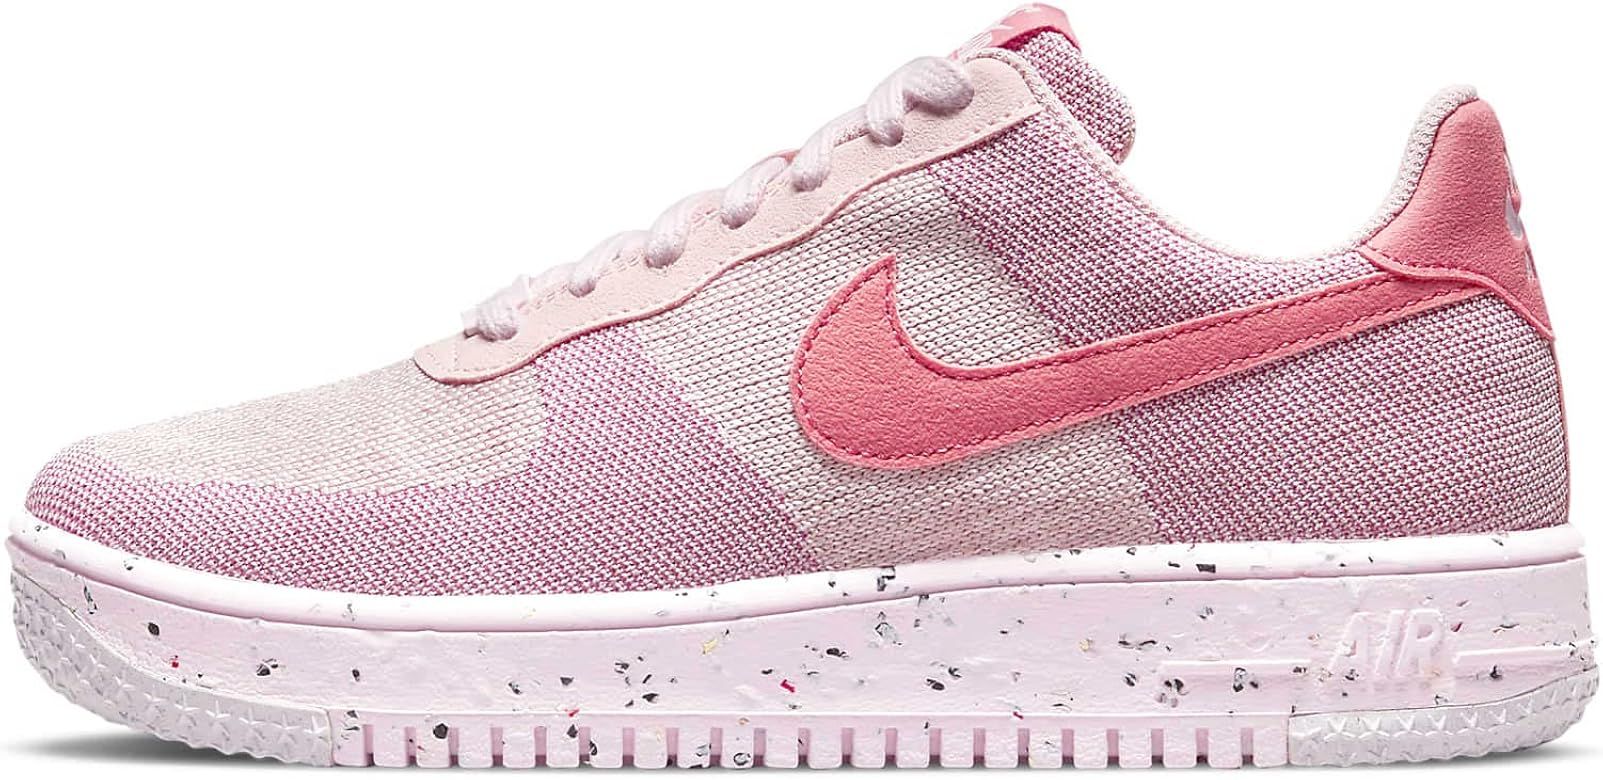 Nike Womens Air Force 1 Crater Flyknit Pink Glaze/Pink Salt (DC7273 600) - 8.5 | Amazon (US)